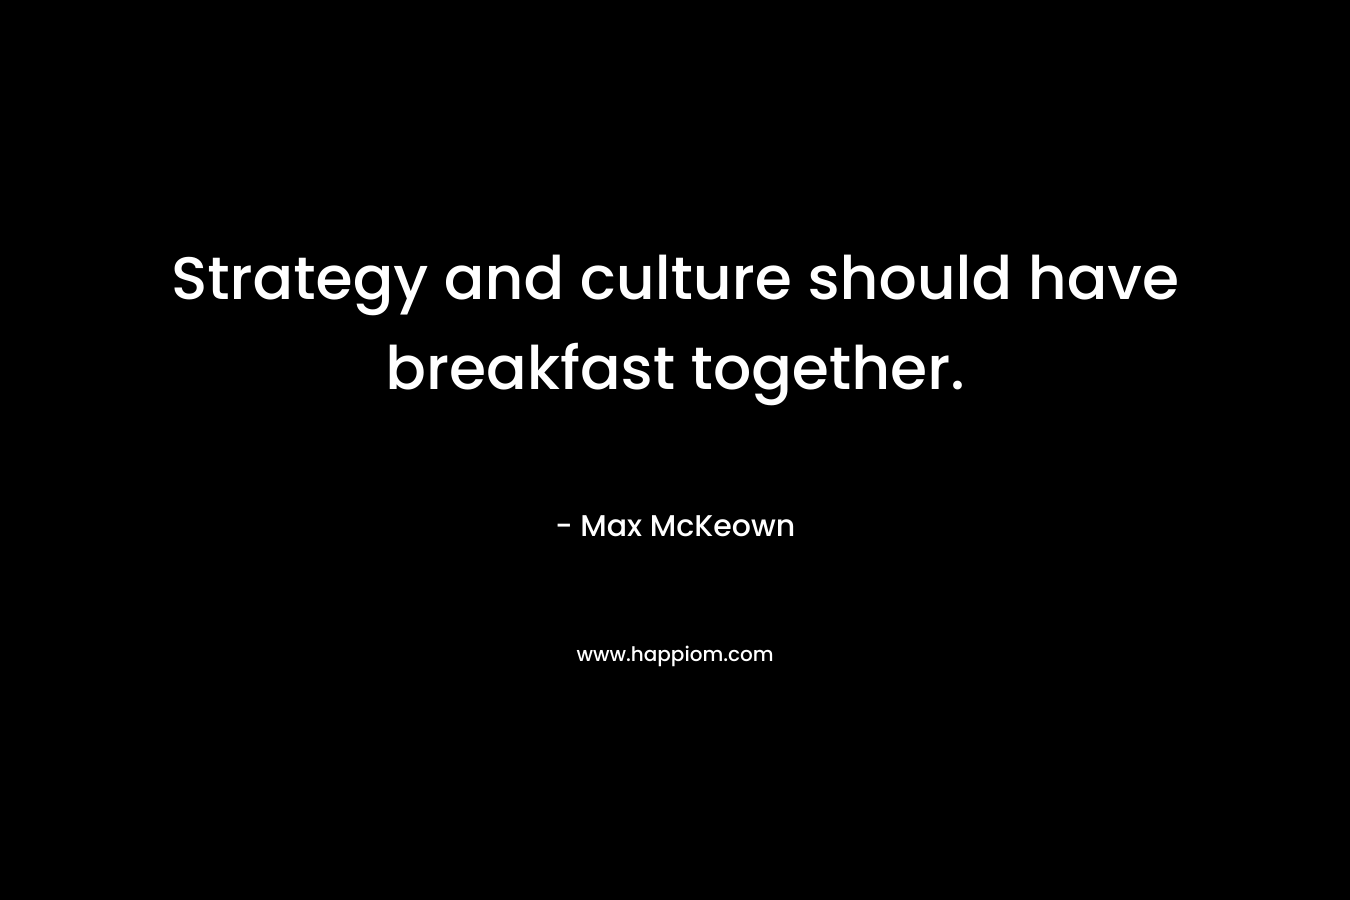 Strategy and culture should have breakfast together.